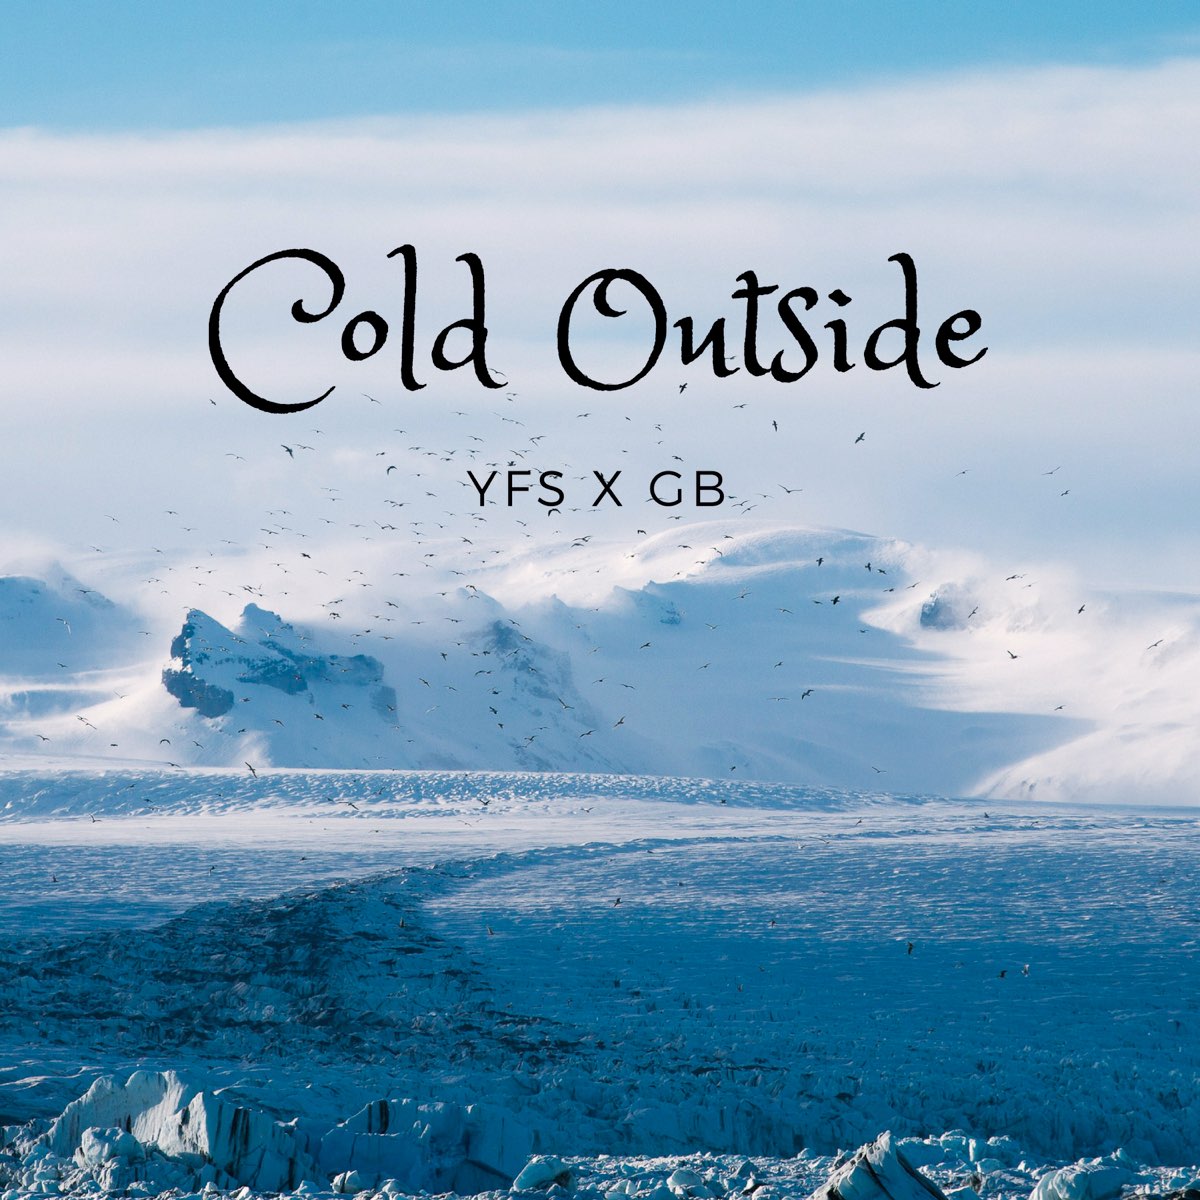 Cold музыка. Cold outside. Cold music